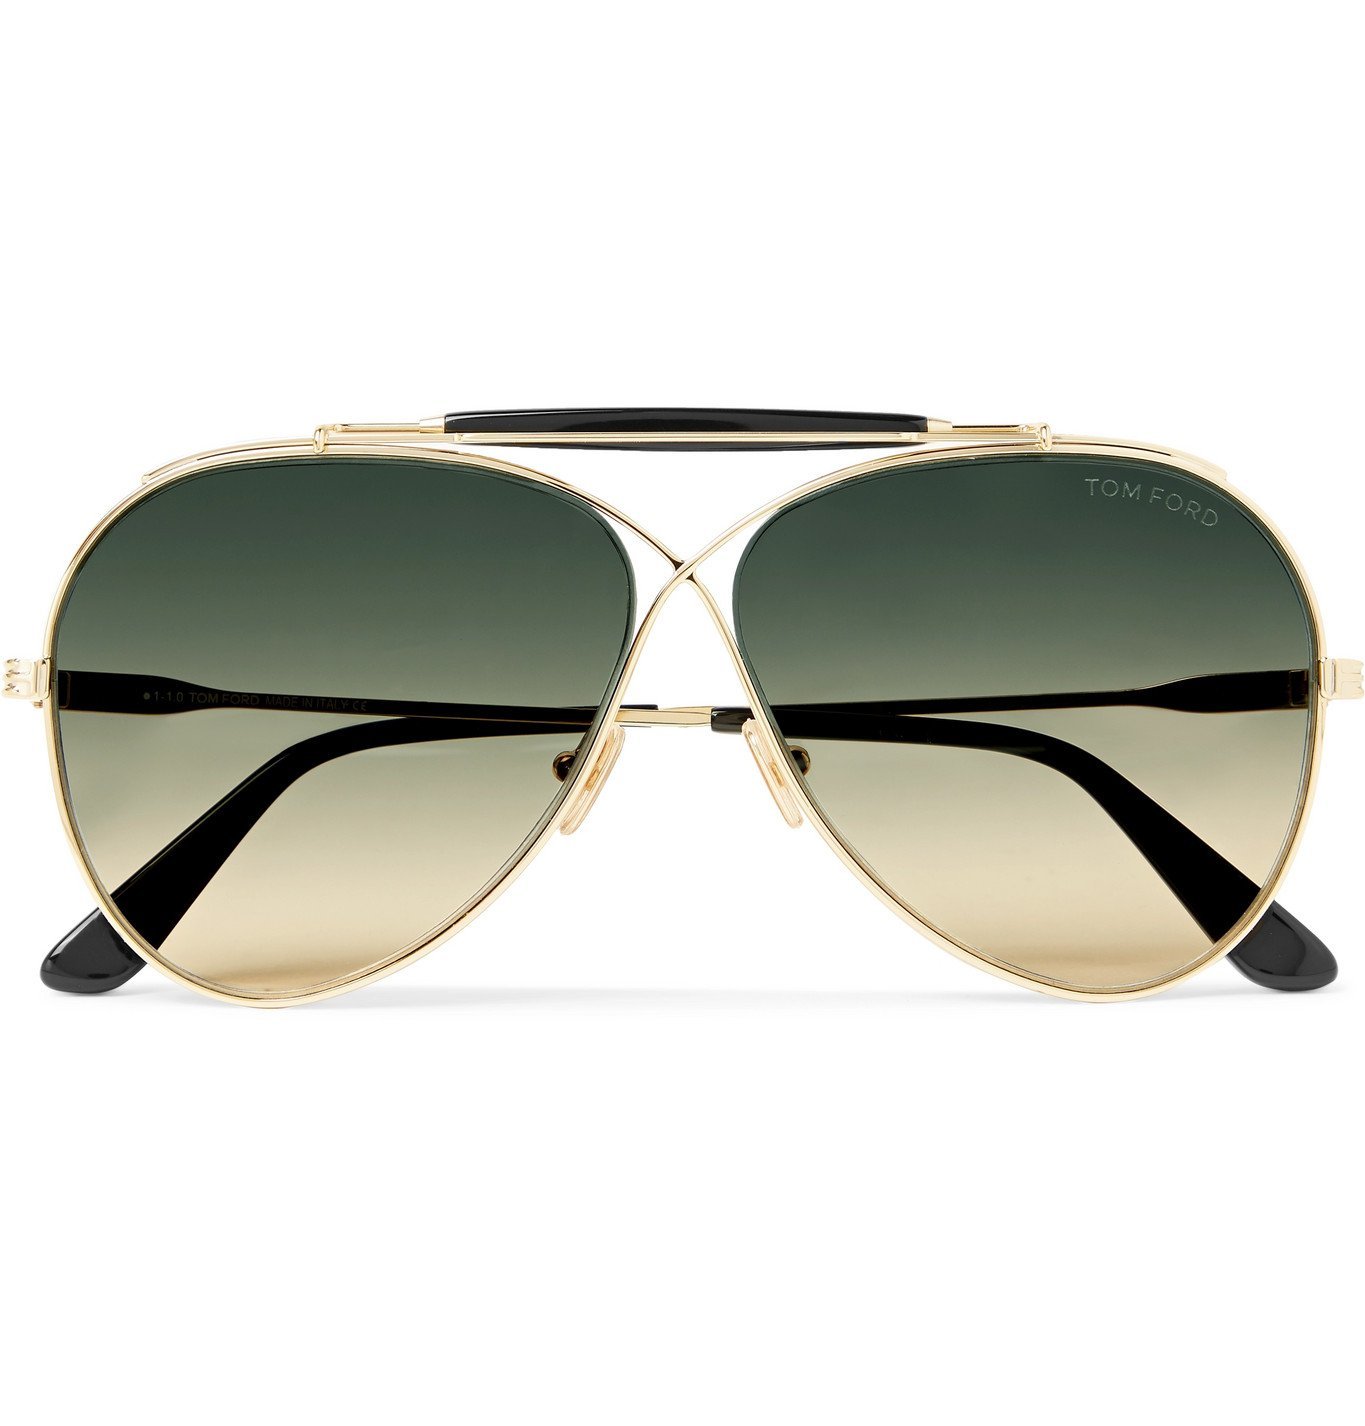 TOM FORD - Holden Aviator-Style Gold-Tone and Acetate Sunglasses - Gold TOM  FORD